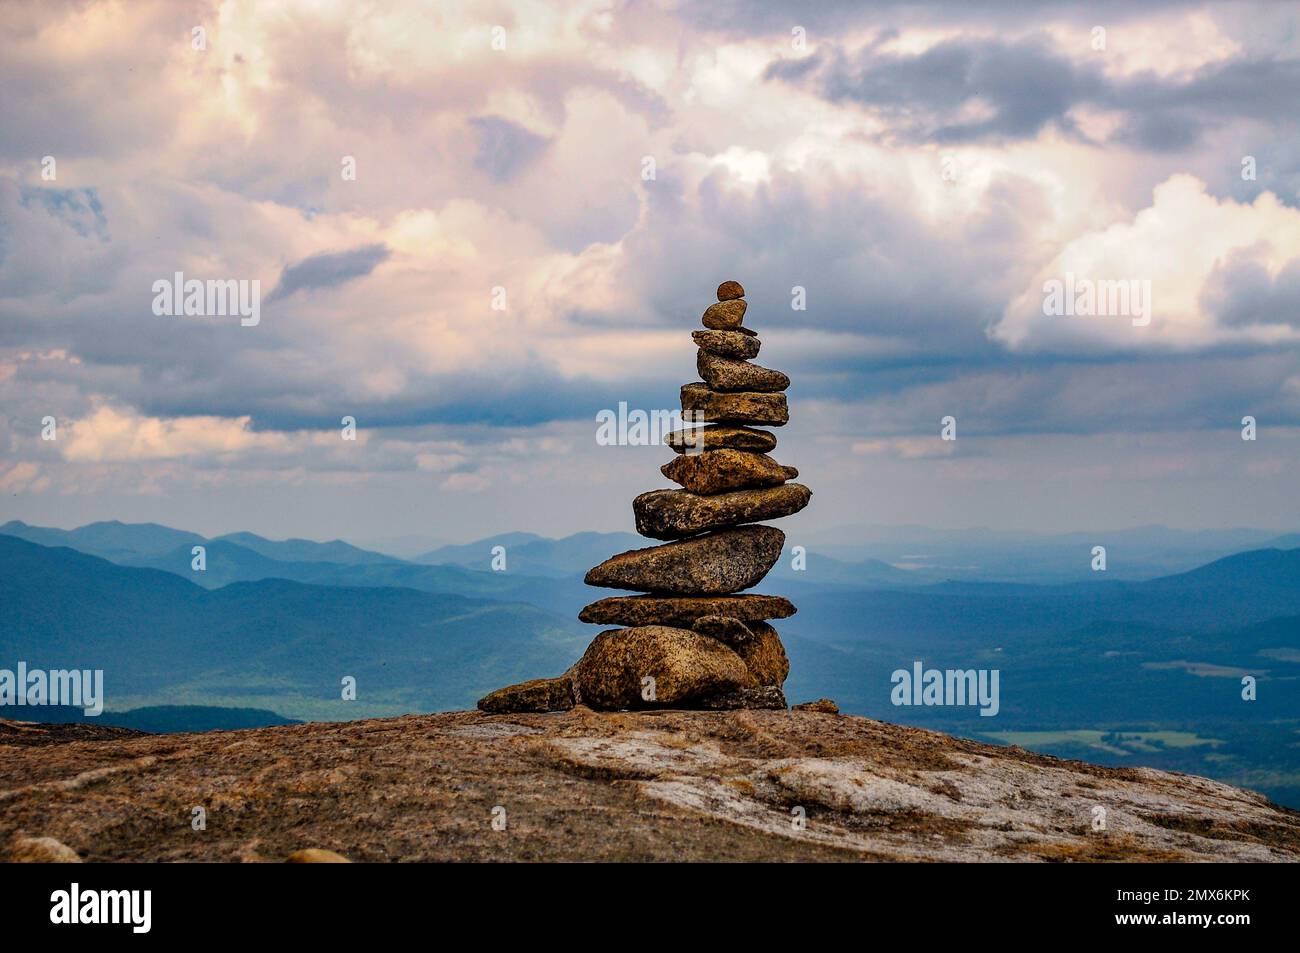 A Rock Cairn, Rocks Flying on the Hiking Trail, auf dem Gipfel des Cascade Mountain in den Adirondack Mountains in New York Stat Stockfoto